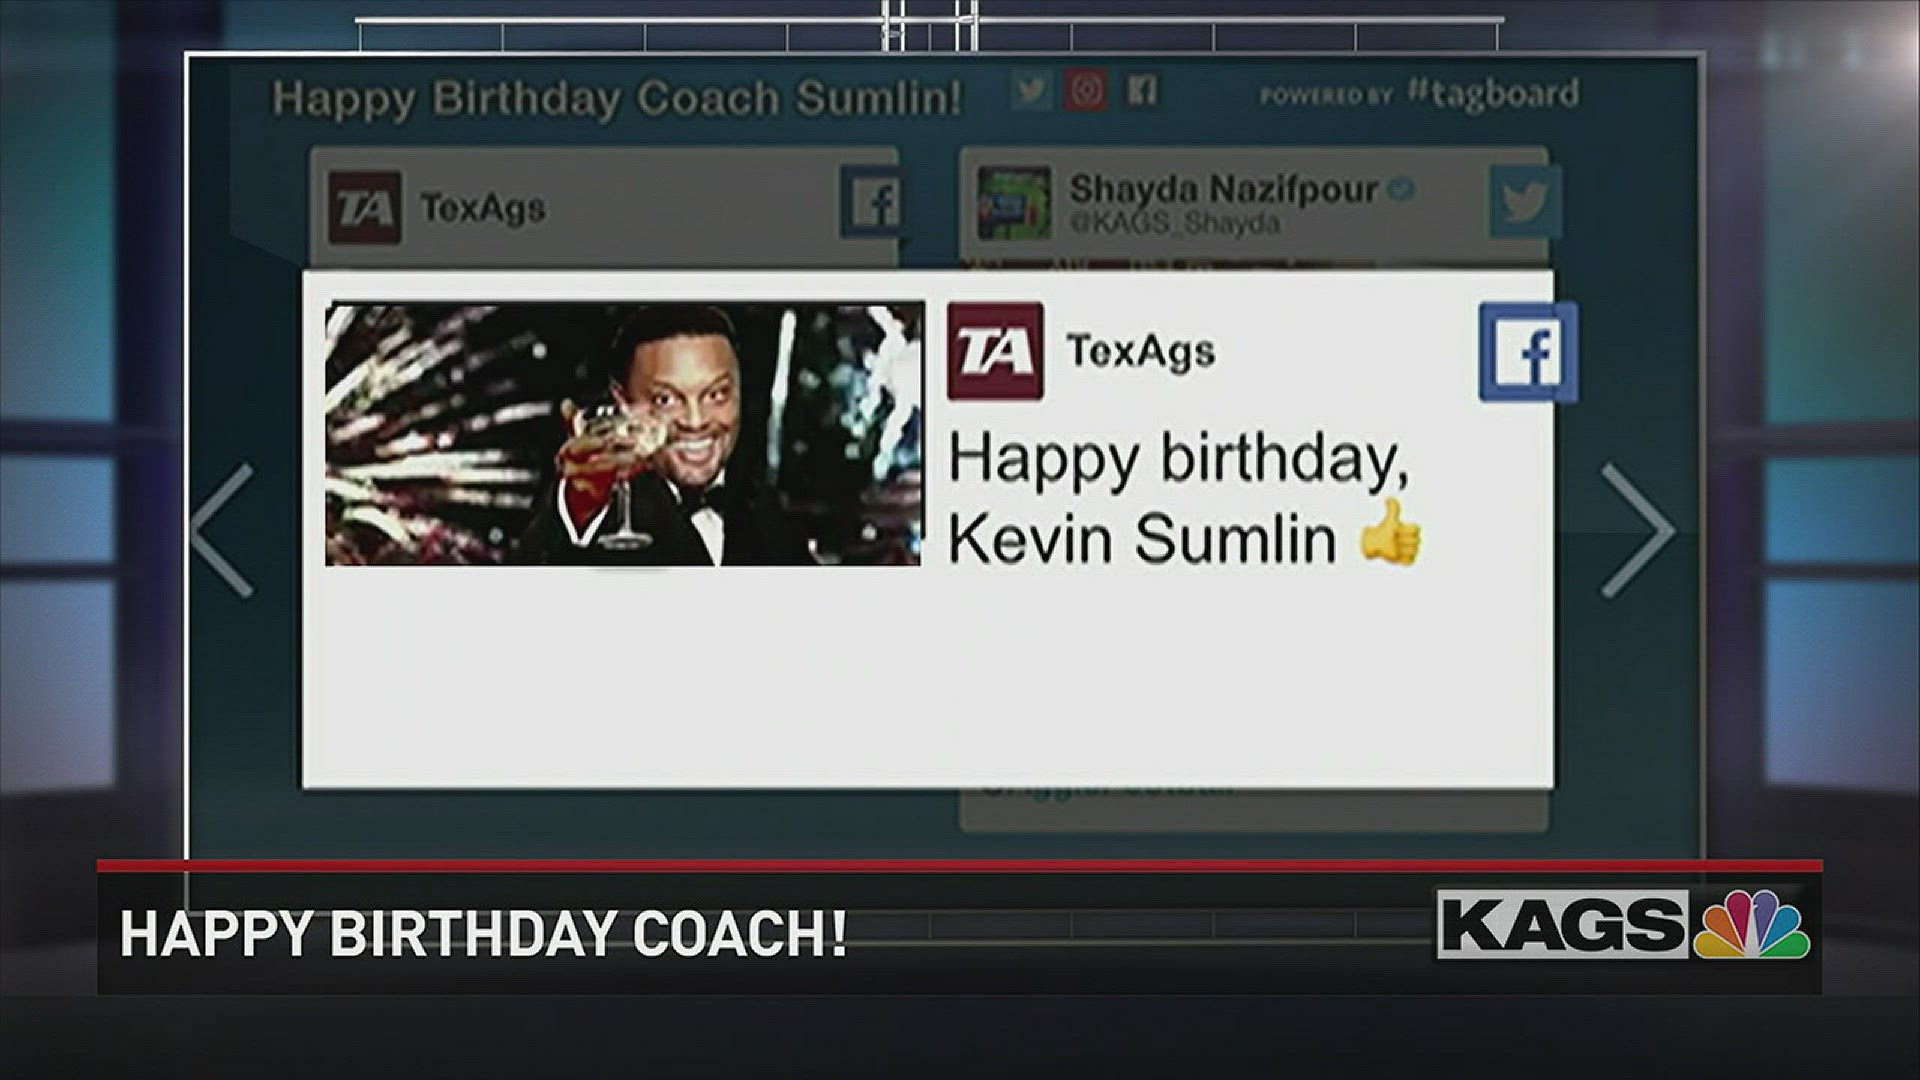 Birthday wishes for Coach Sumlin.